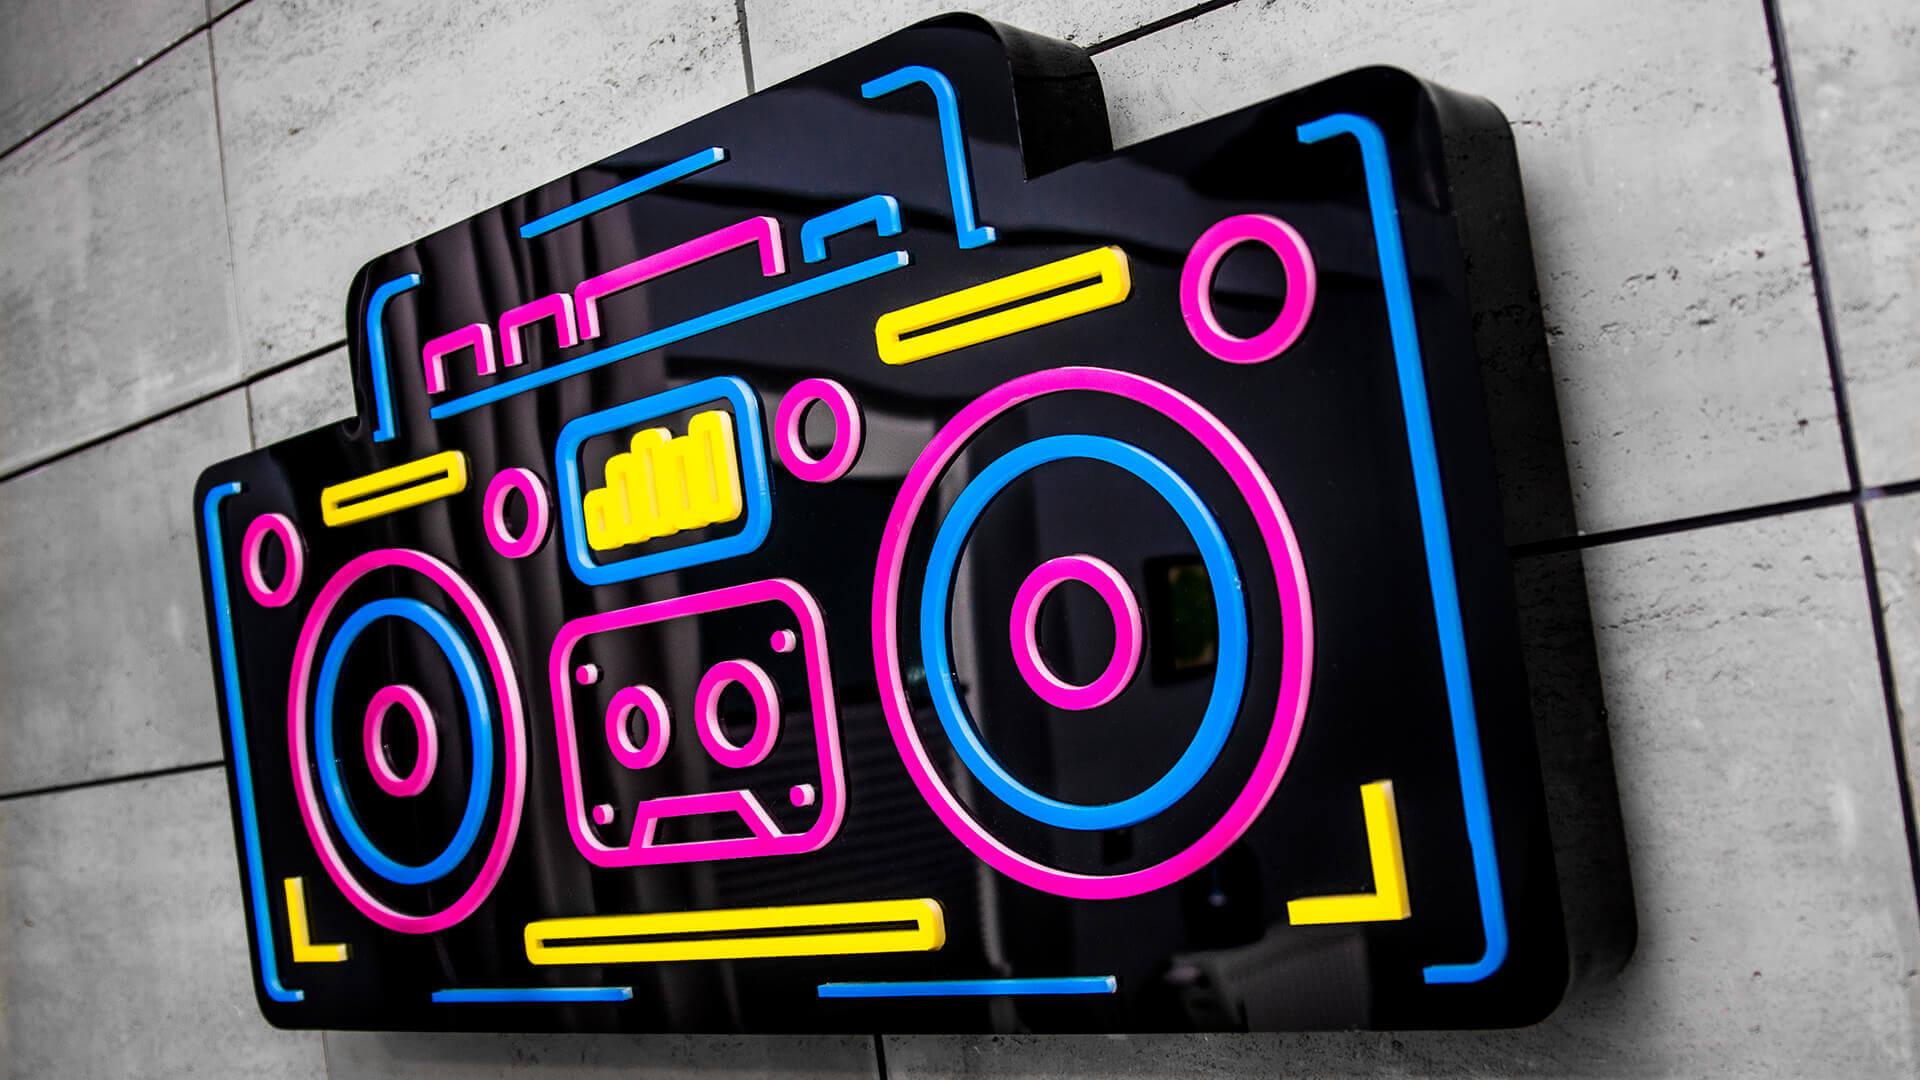 boombox-neon-space-colored-neon-on-the-bedroom-caqseton-in-the-office-cassette-over-0-bed-on-a-concrete-wall-bojano (22)